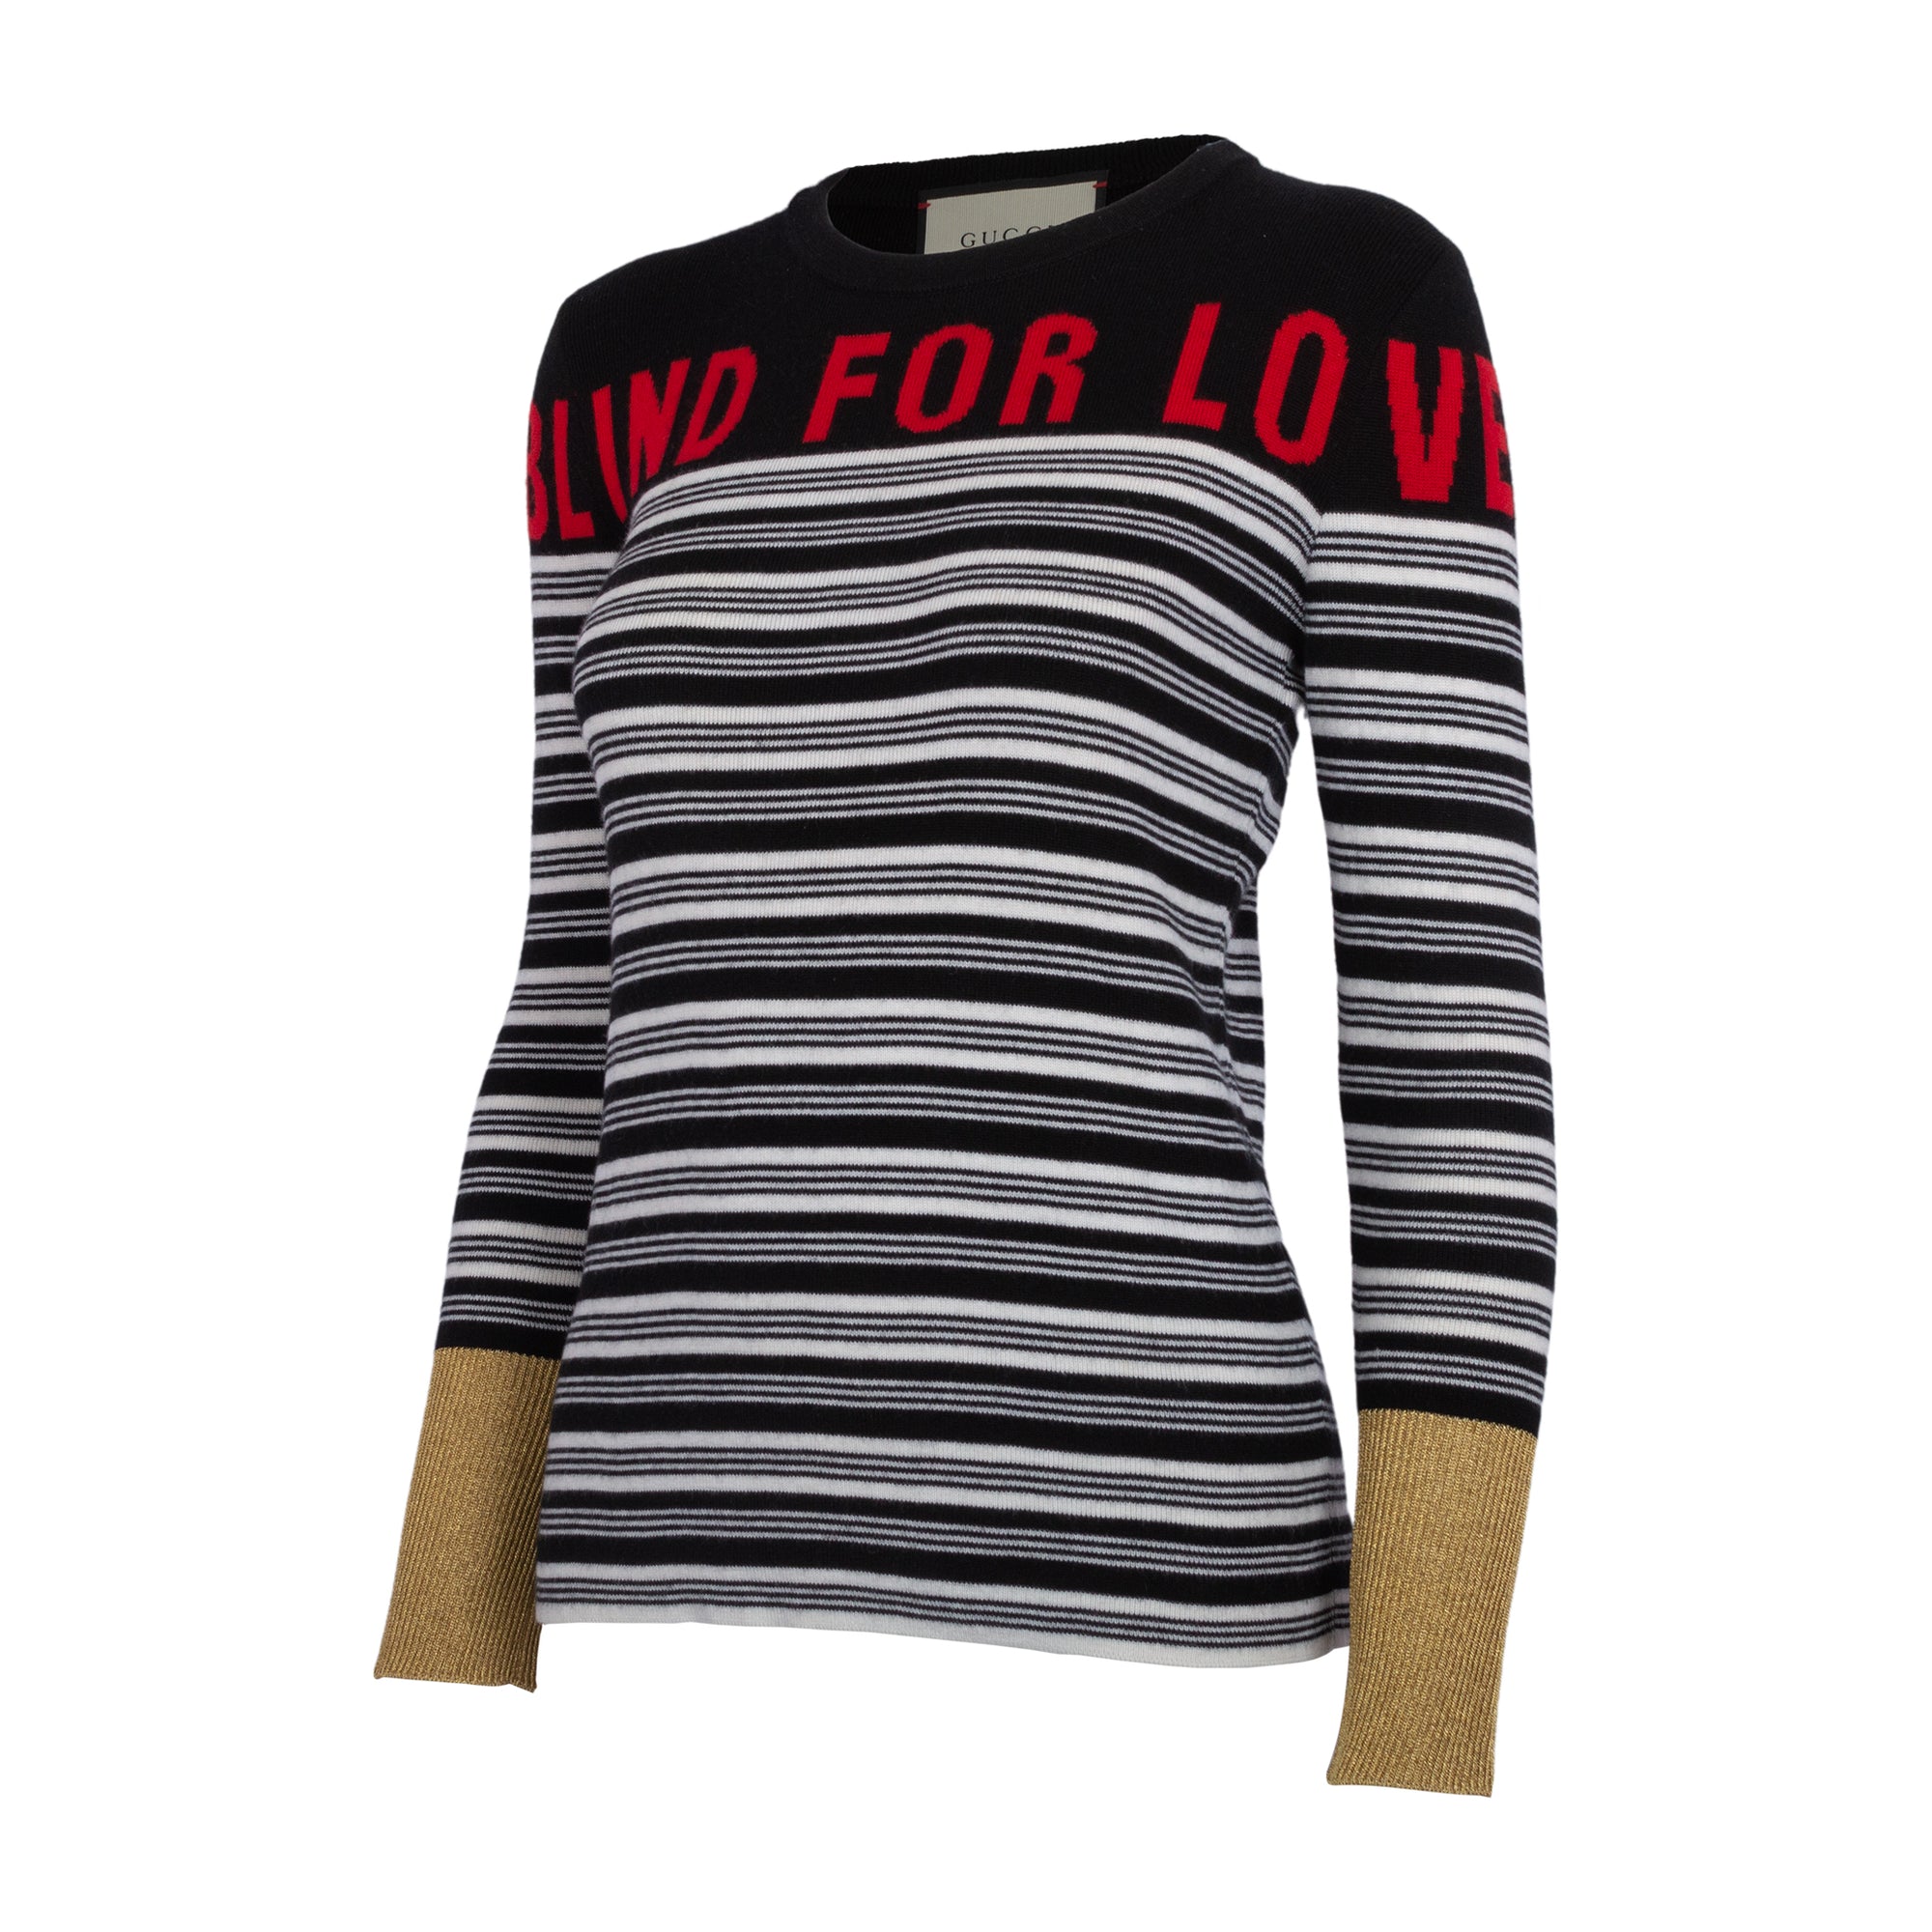 Gucci Blind for Love Striped Knit Sweater